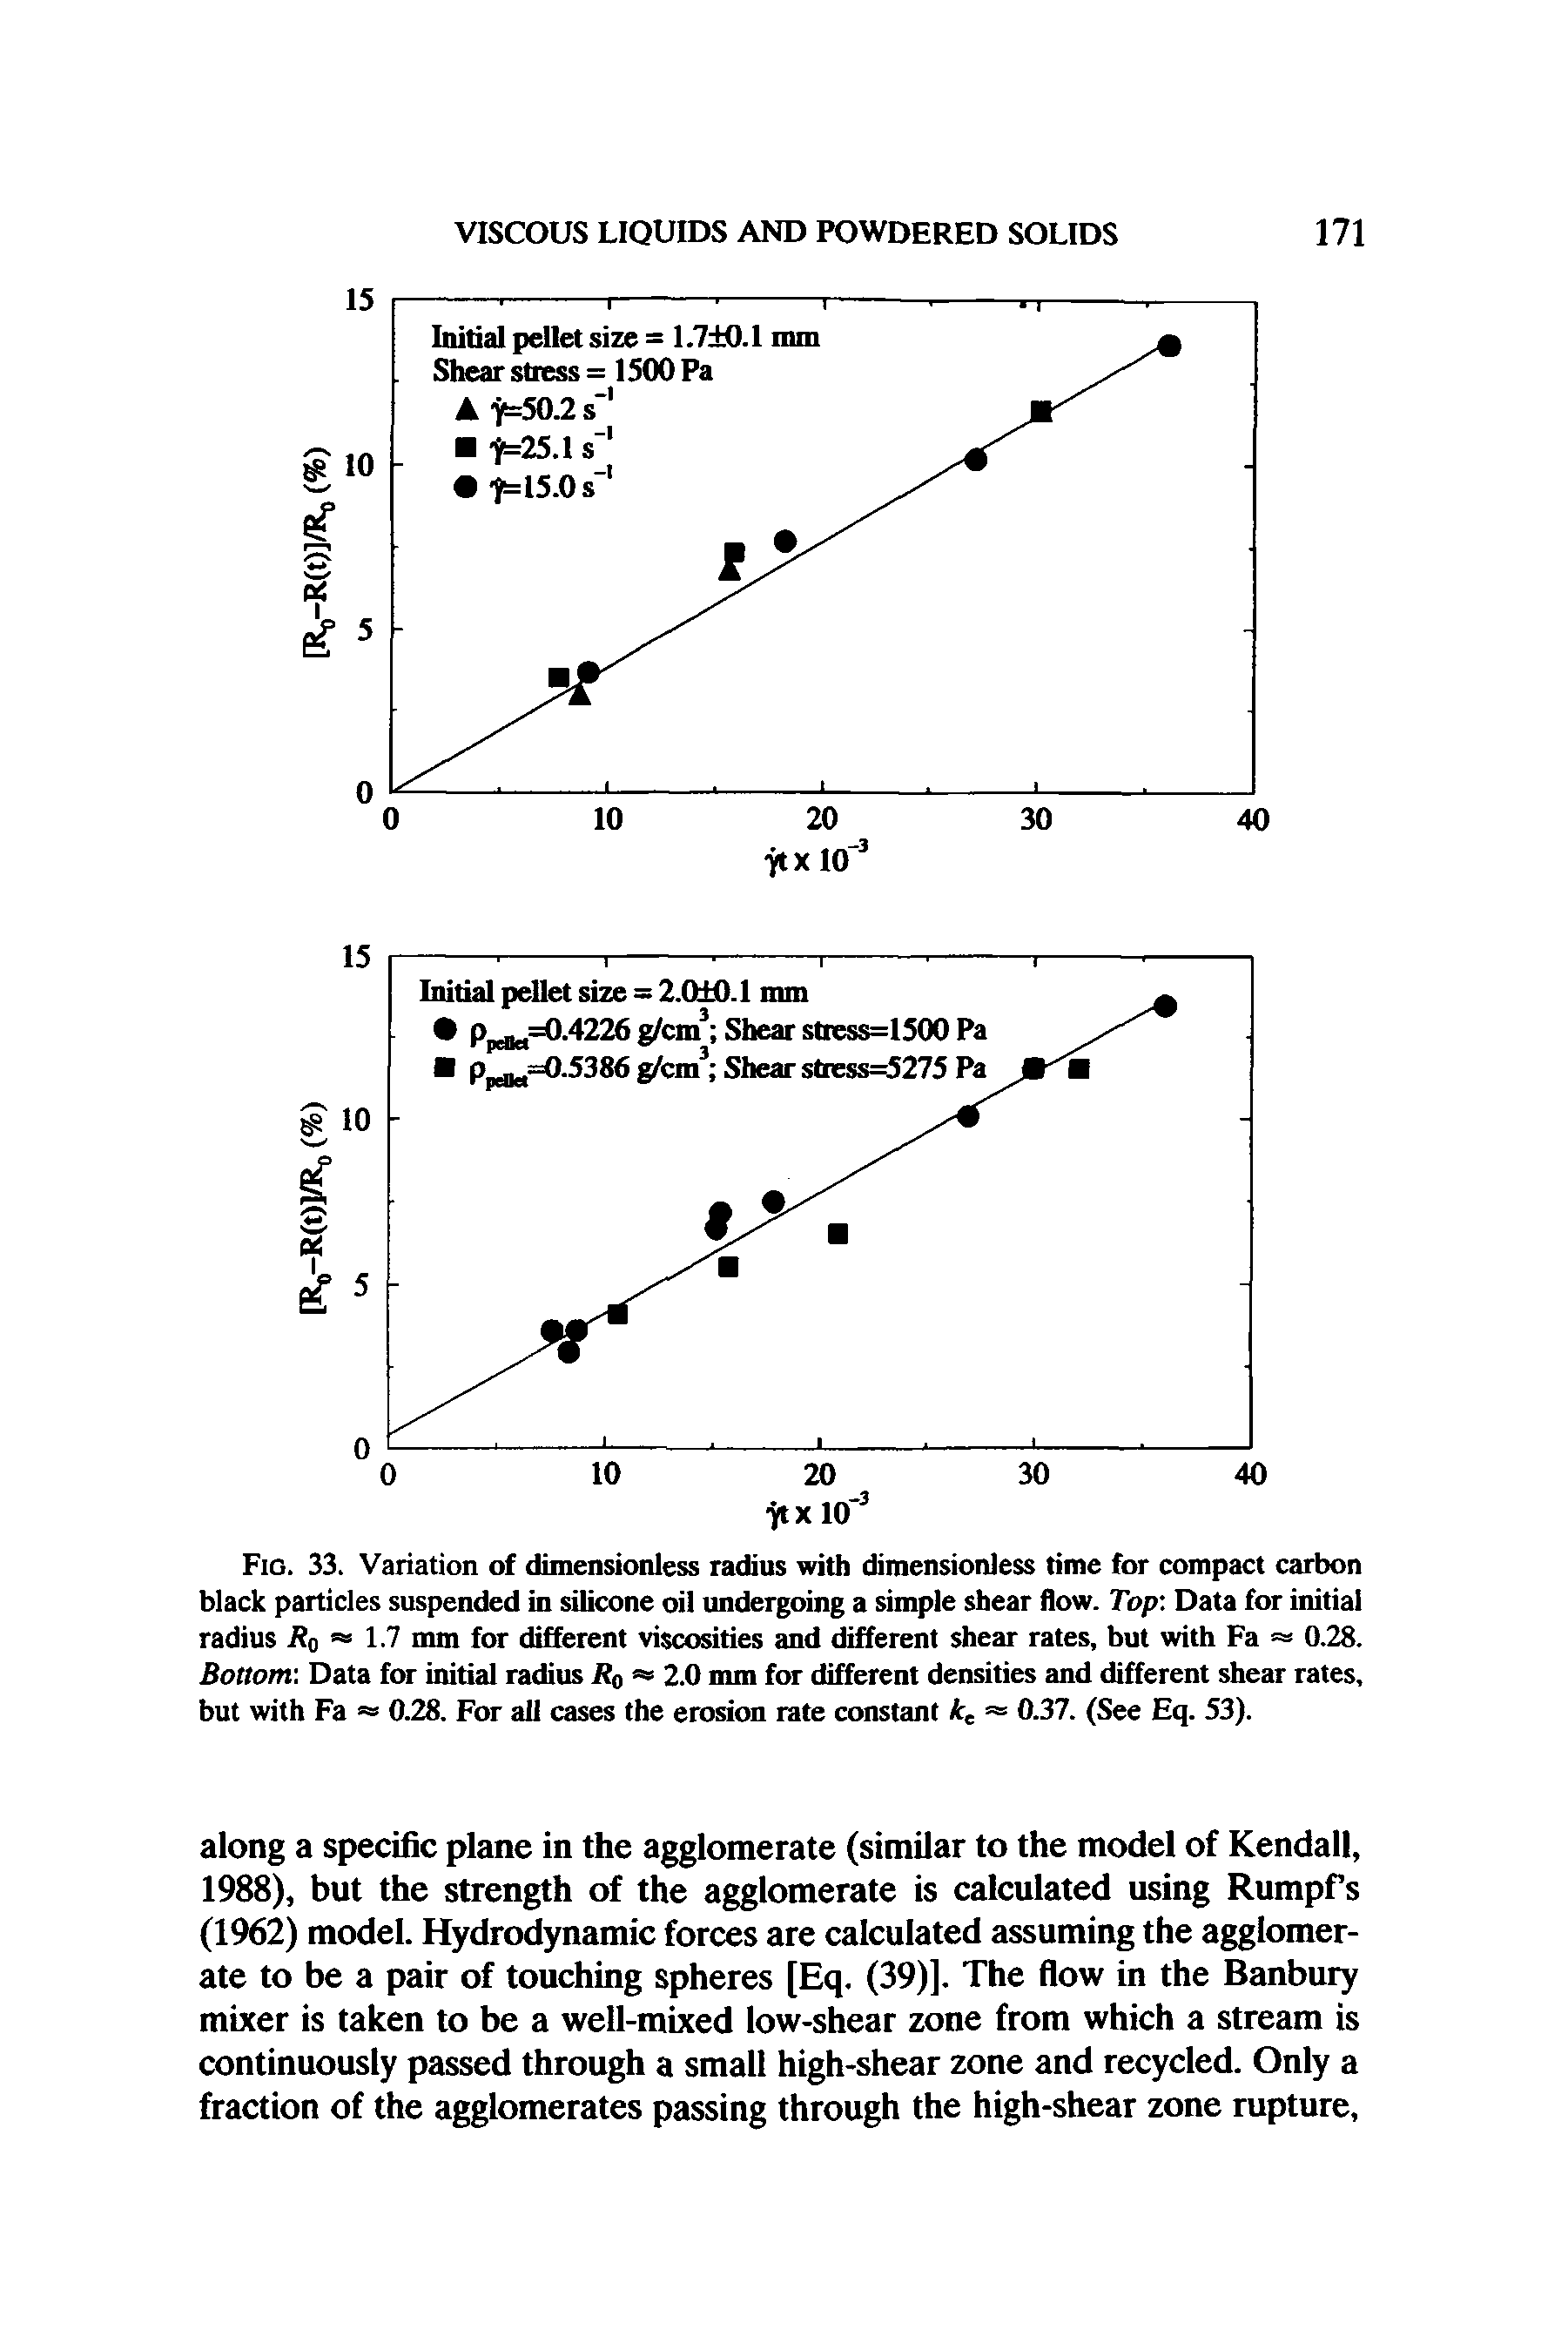 Fig. 33. Variation of dimensionless radius with dimensionless time for compact carbon black particles suspended in silicone oil undergoing a simple shear flow. Top Data for initial radius Ho 1.7 mm for different viscosities and different shear rates, but with Fa = 0.28. Bottom Data for initial radius R0 = 2.0 mm for different densities and different shear rates, but with Fa 0.28. For all cases the erosion rate constant kc = 0.37. (See Eq. 53).